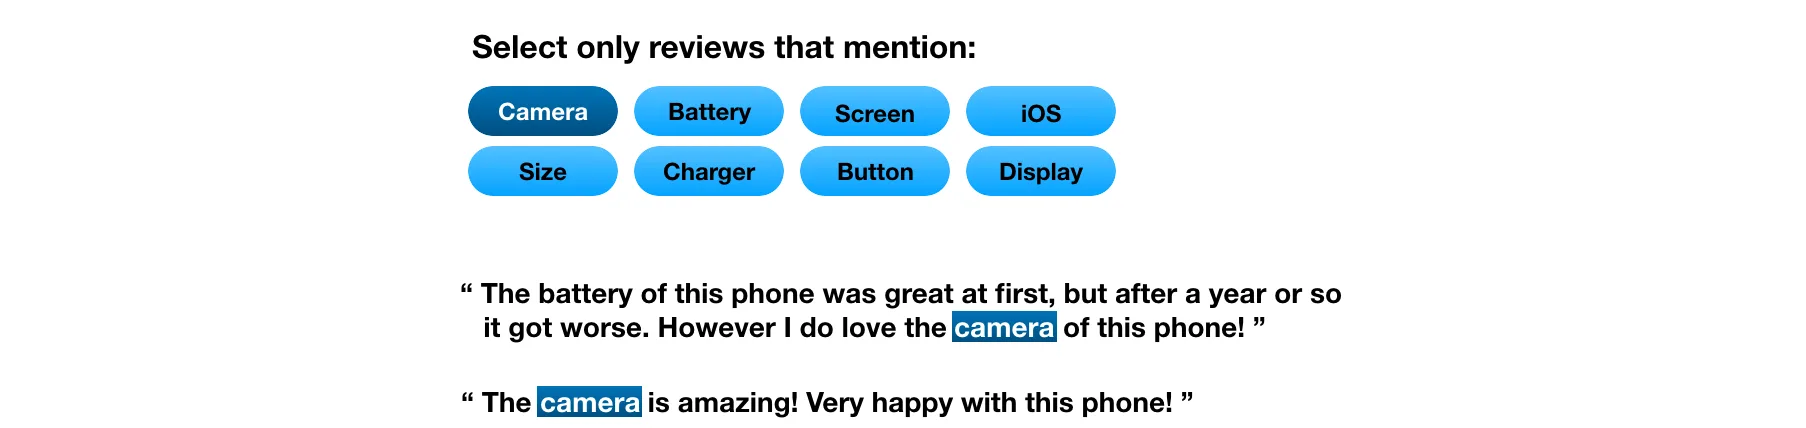 Read only the reviews mentioning the word "camera".